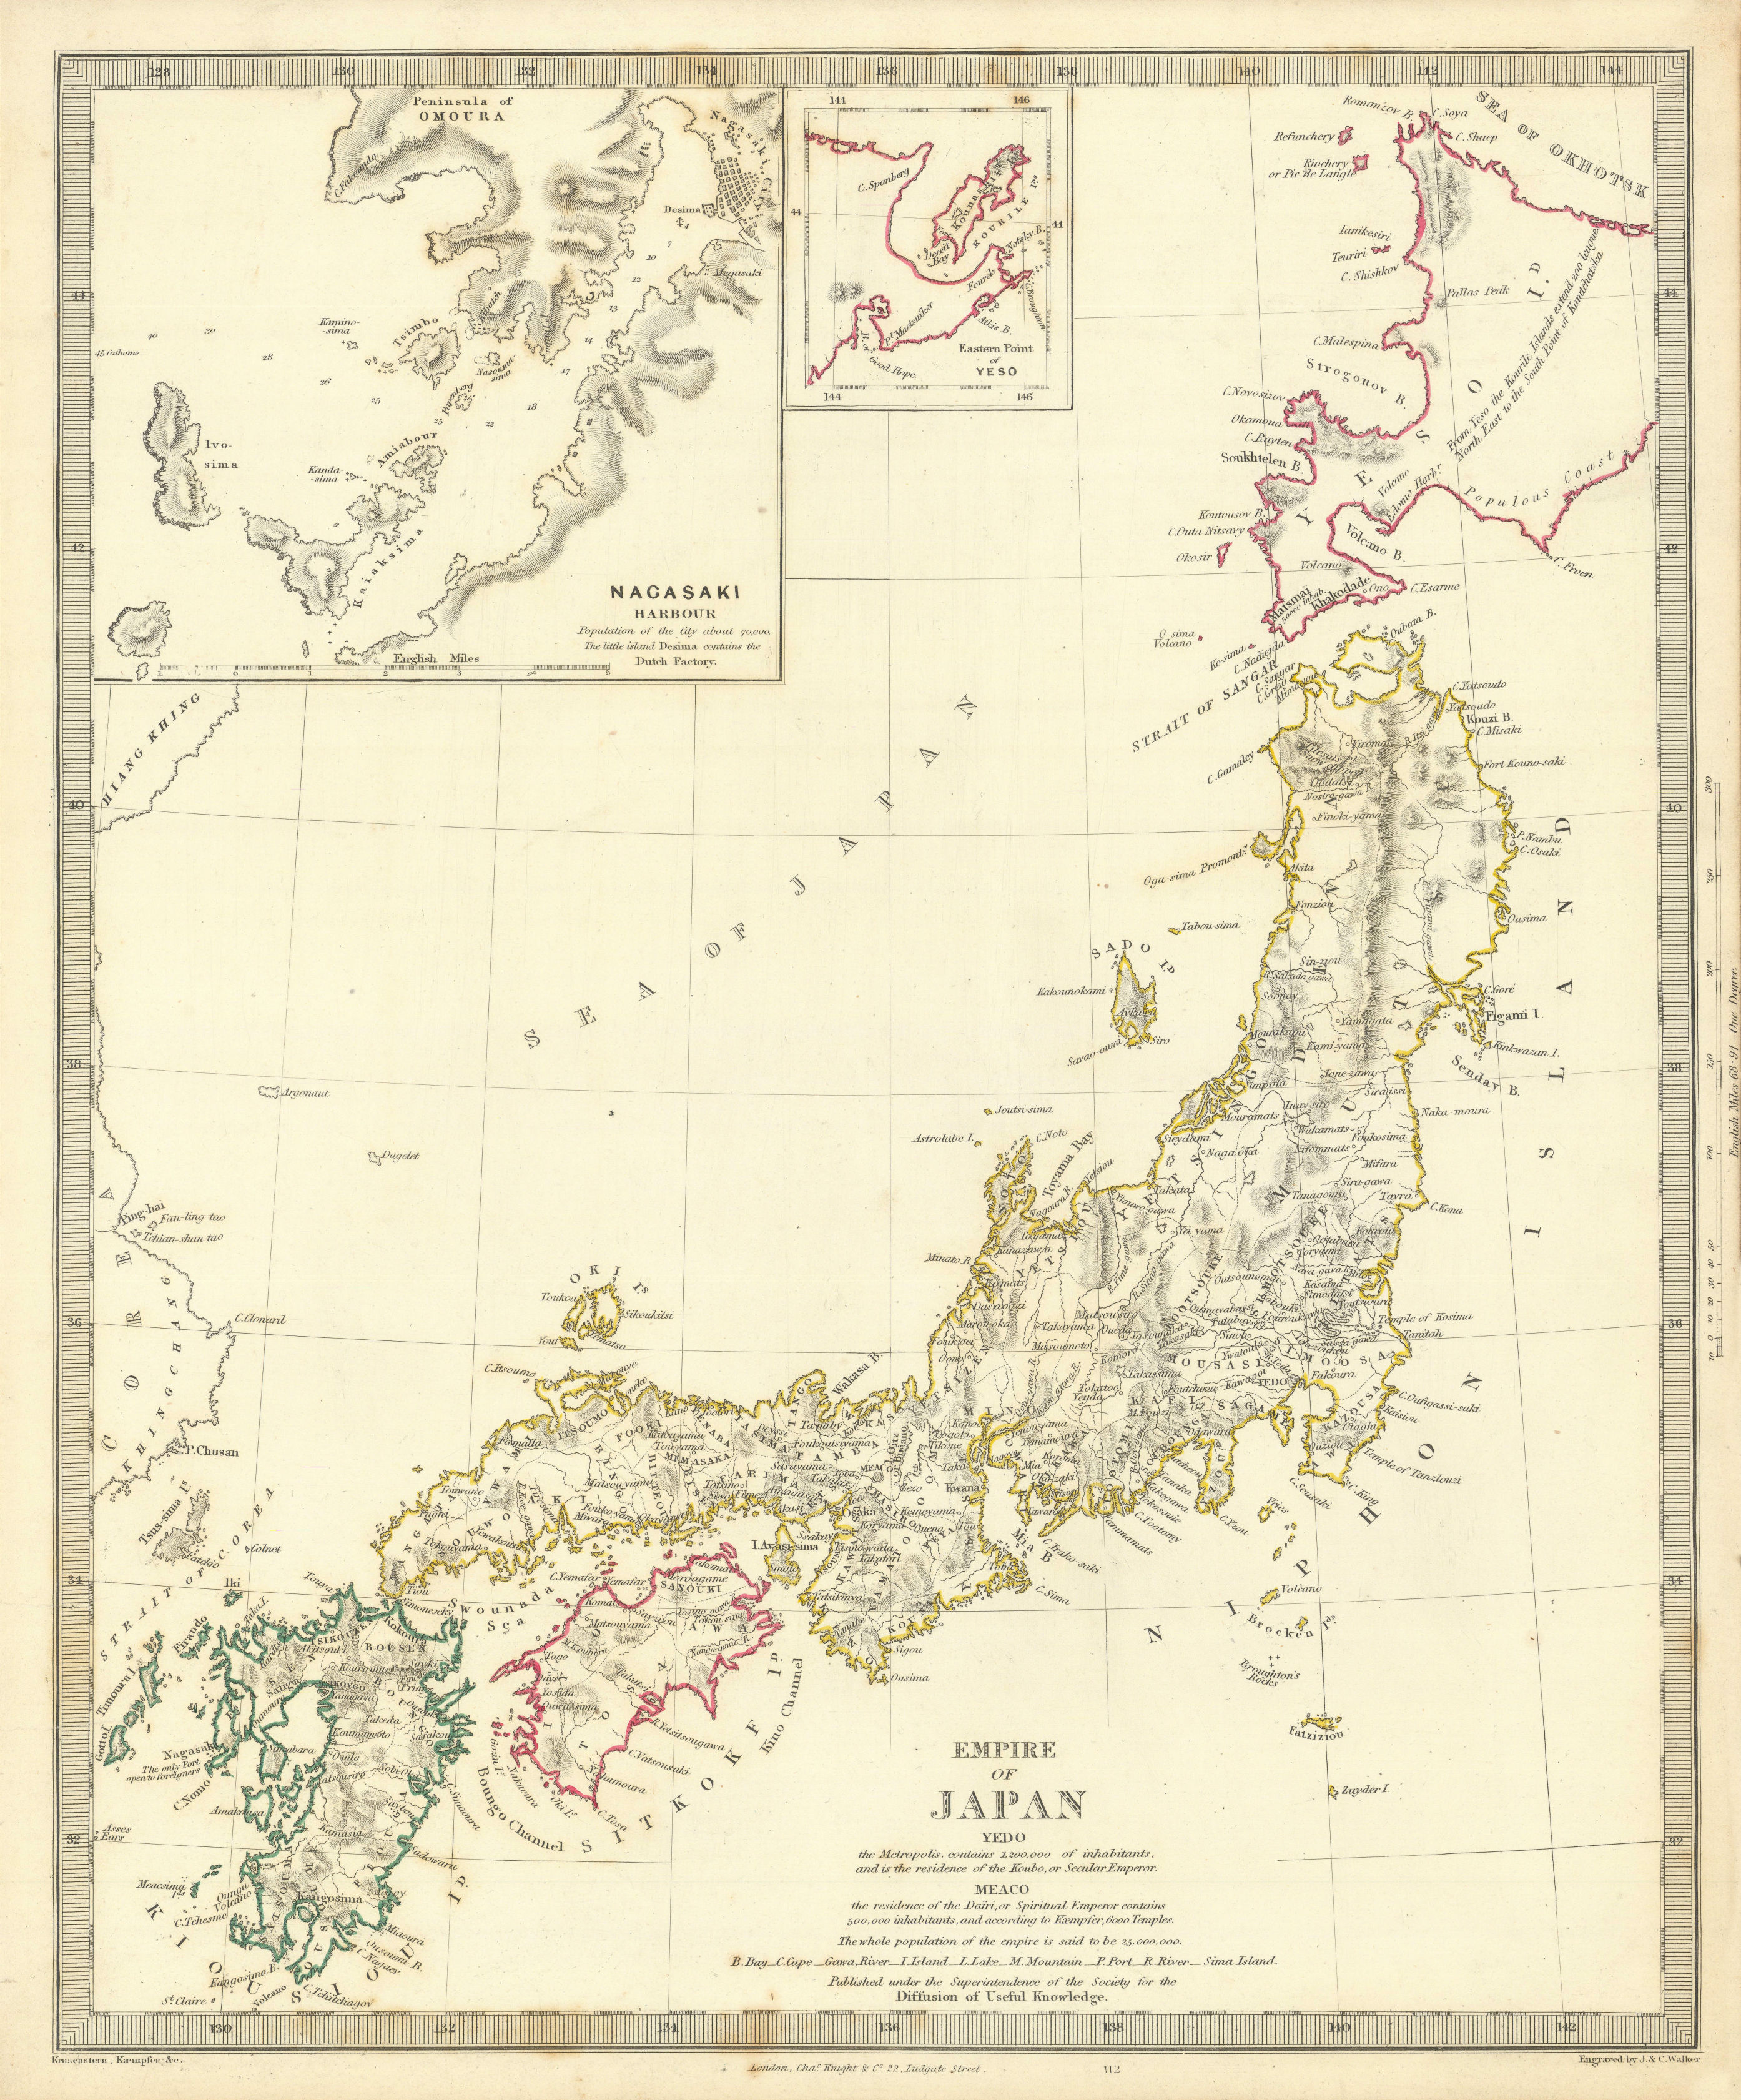 Associate Product EMPIRE OF JAPAN  Nagasaki Harbour Yeso Niphon Nippon SDUK 1844 old antique map